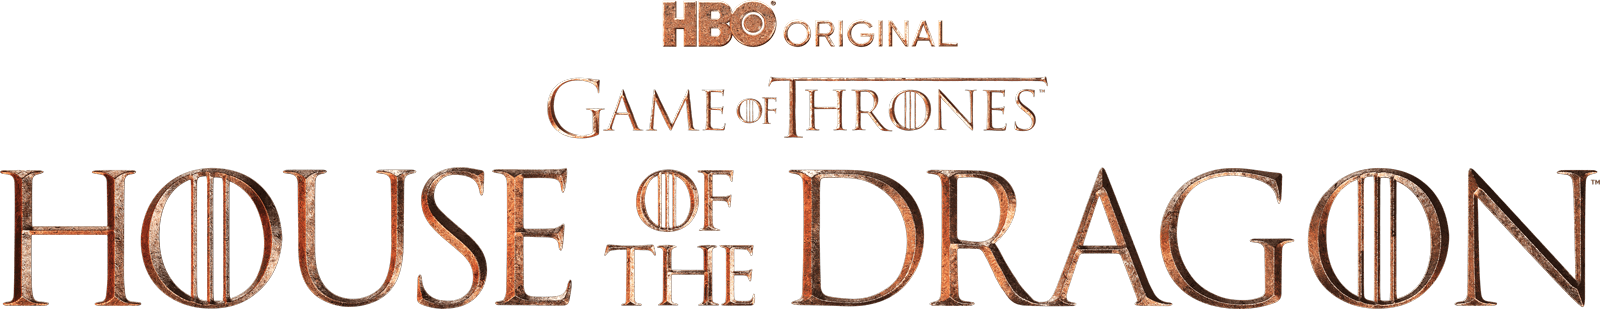 House of the Dragon, Official Website for the HBO Series